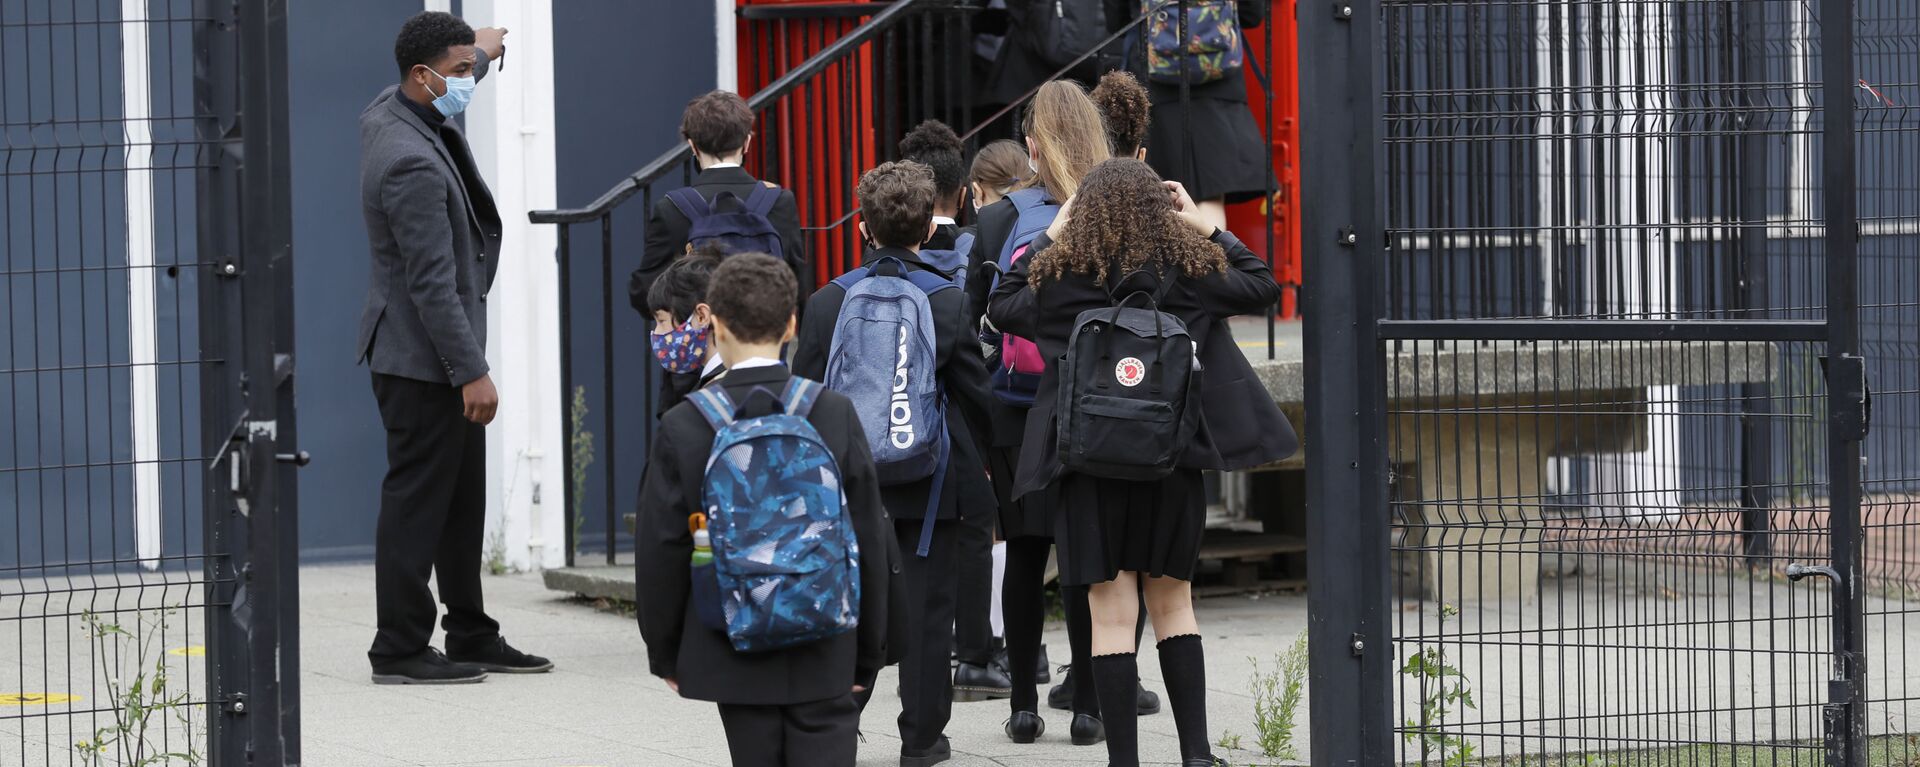 Year seven pupils are directed to socially distance as they arrive for their first day at Kingsdale Foundation School in London, Thursday, Sept. 3, 2020 - Sputnik International, 1920